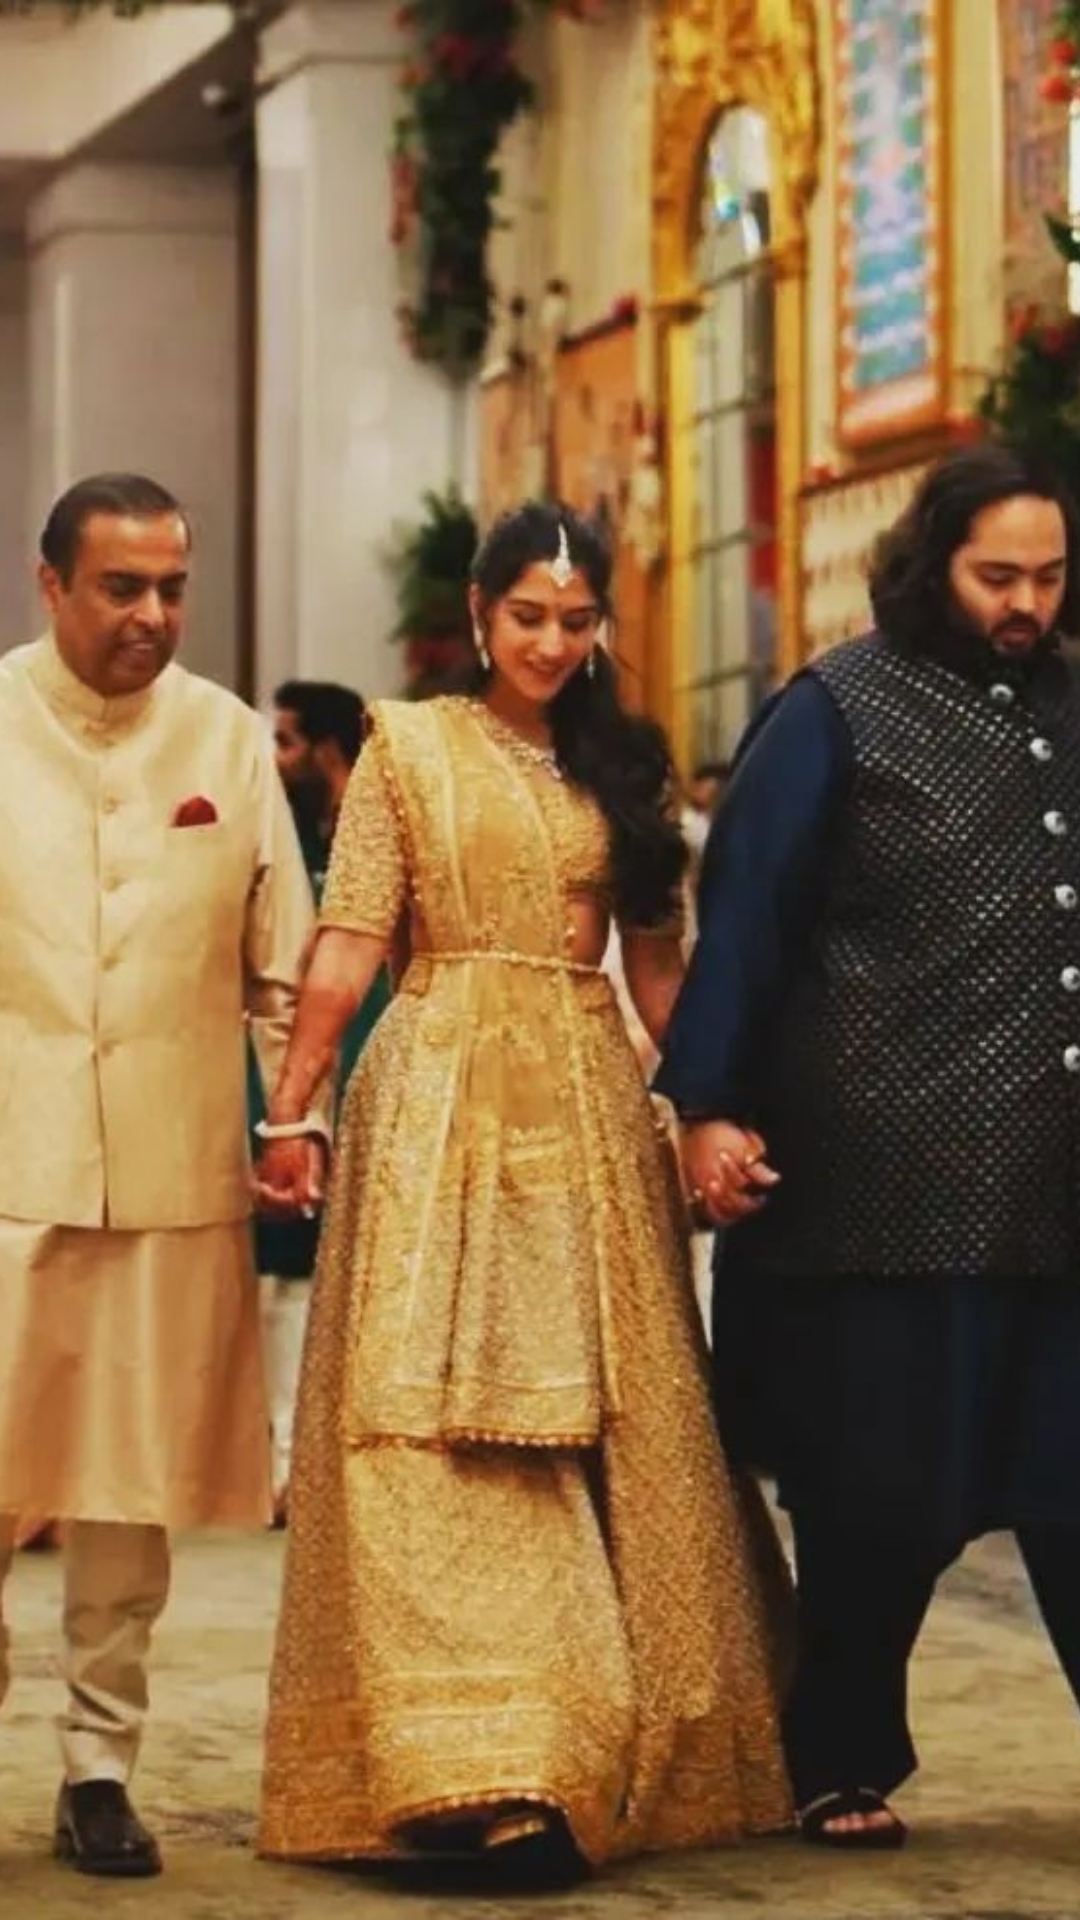 The happy couple, Anant Ambani and Radhika Merchant, walked hand-in-hand with Mukesh Ambani as they arrived for the engagement ceremony.